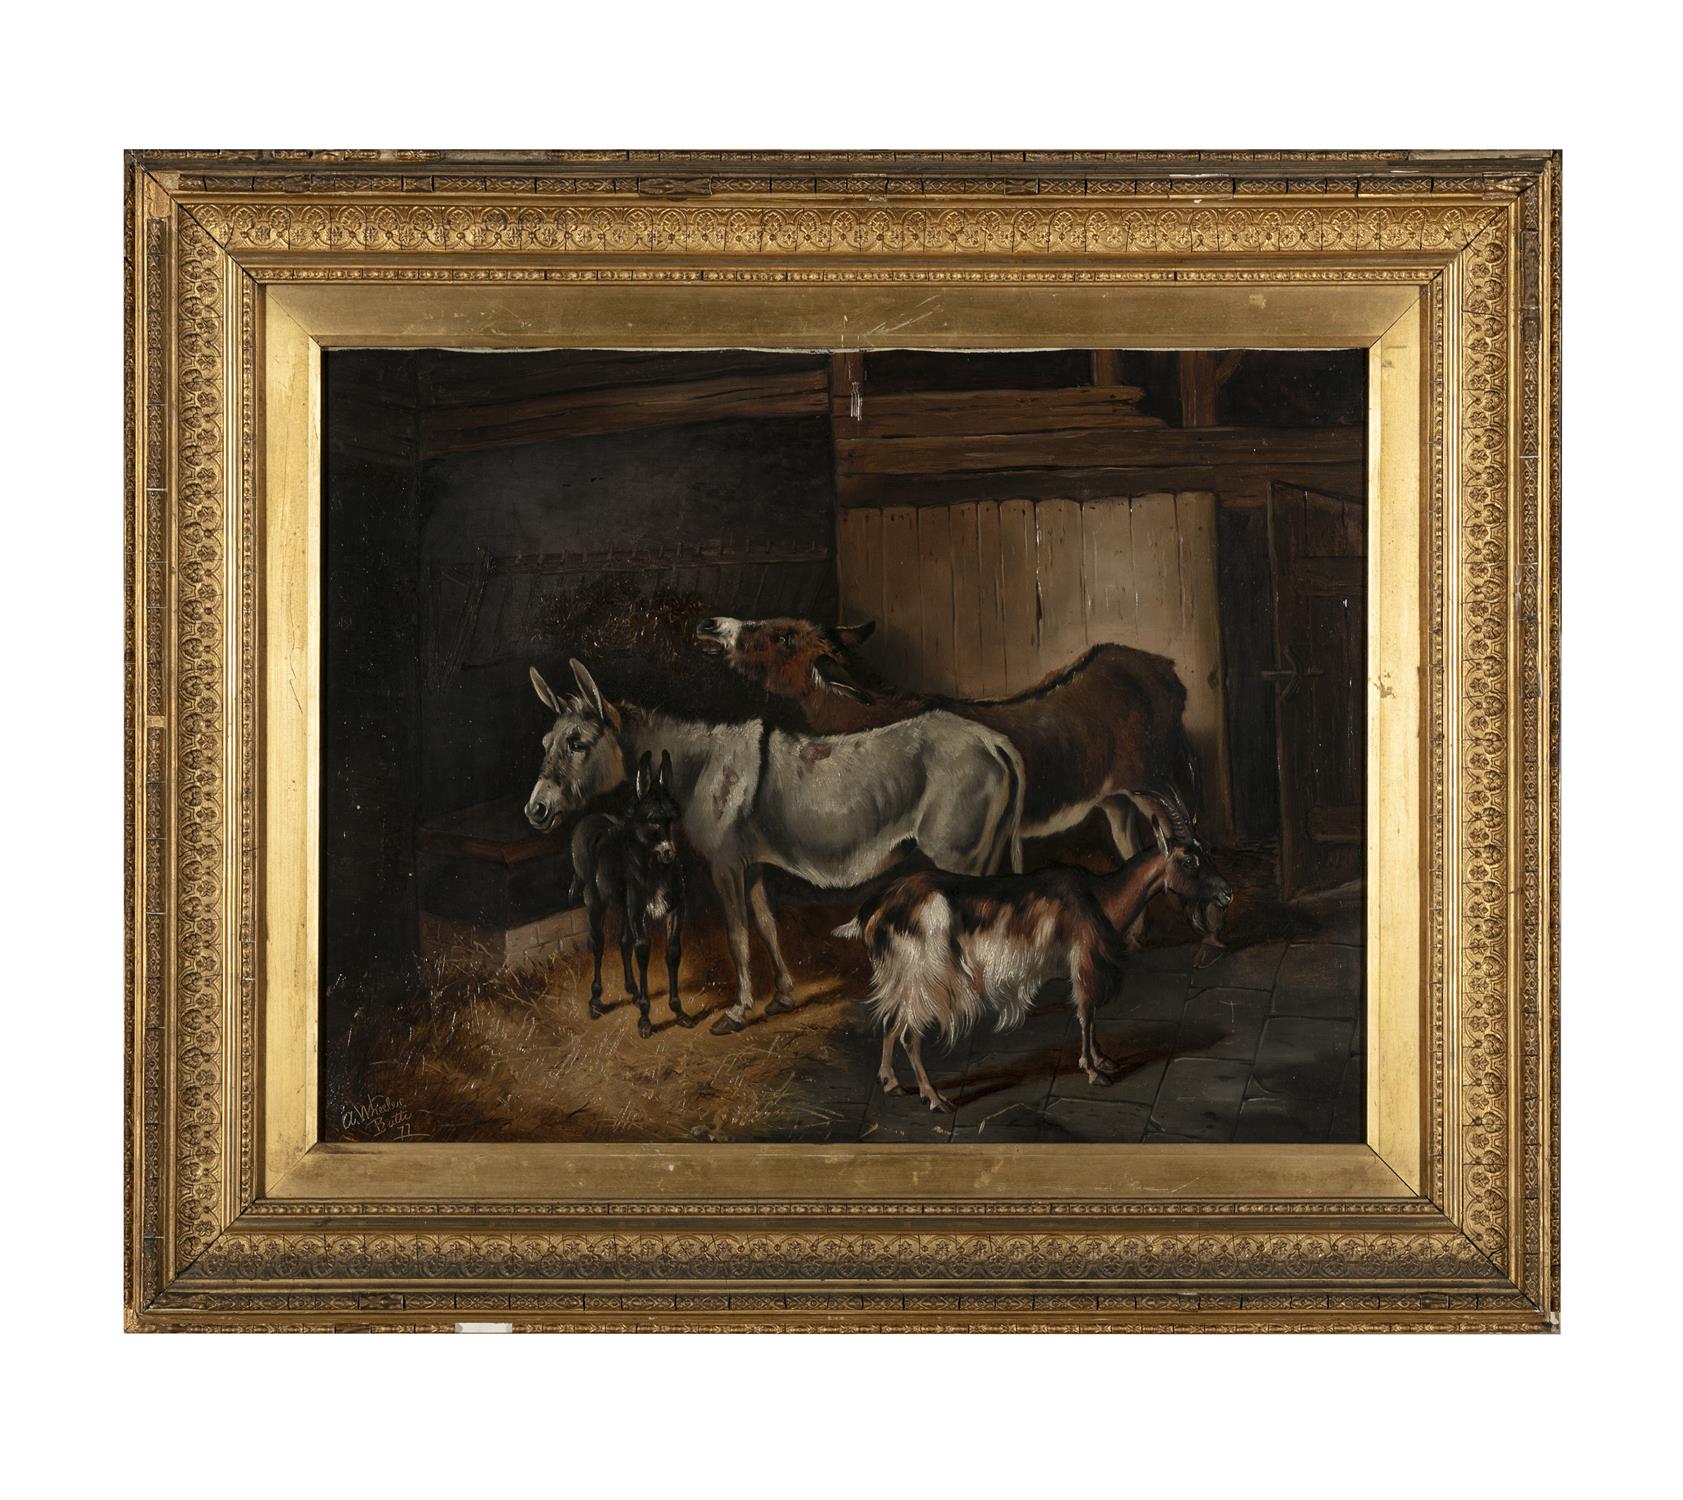 ALFRED WHEELER (1821-1877) Donkeys and goats in a stable Oil on canvas, 45 x 60cm Signed